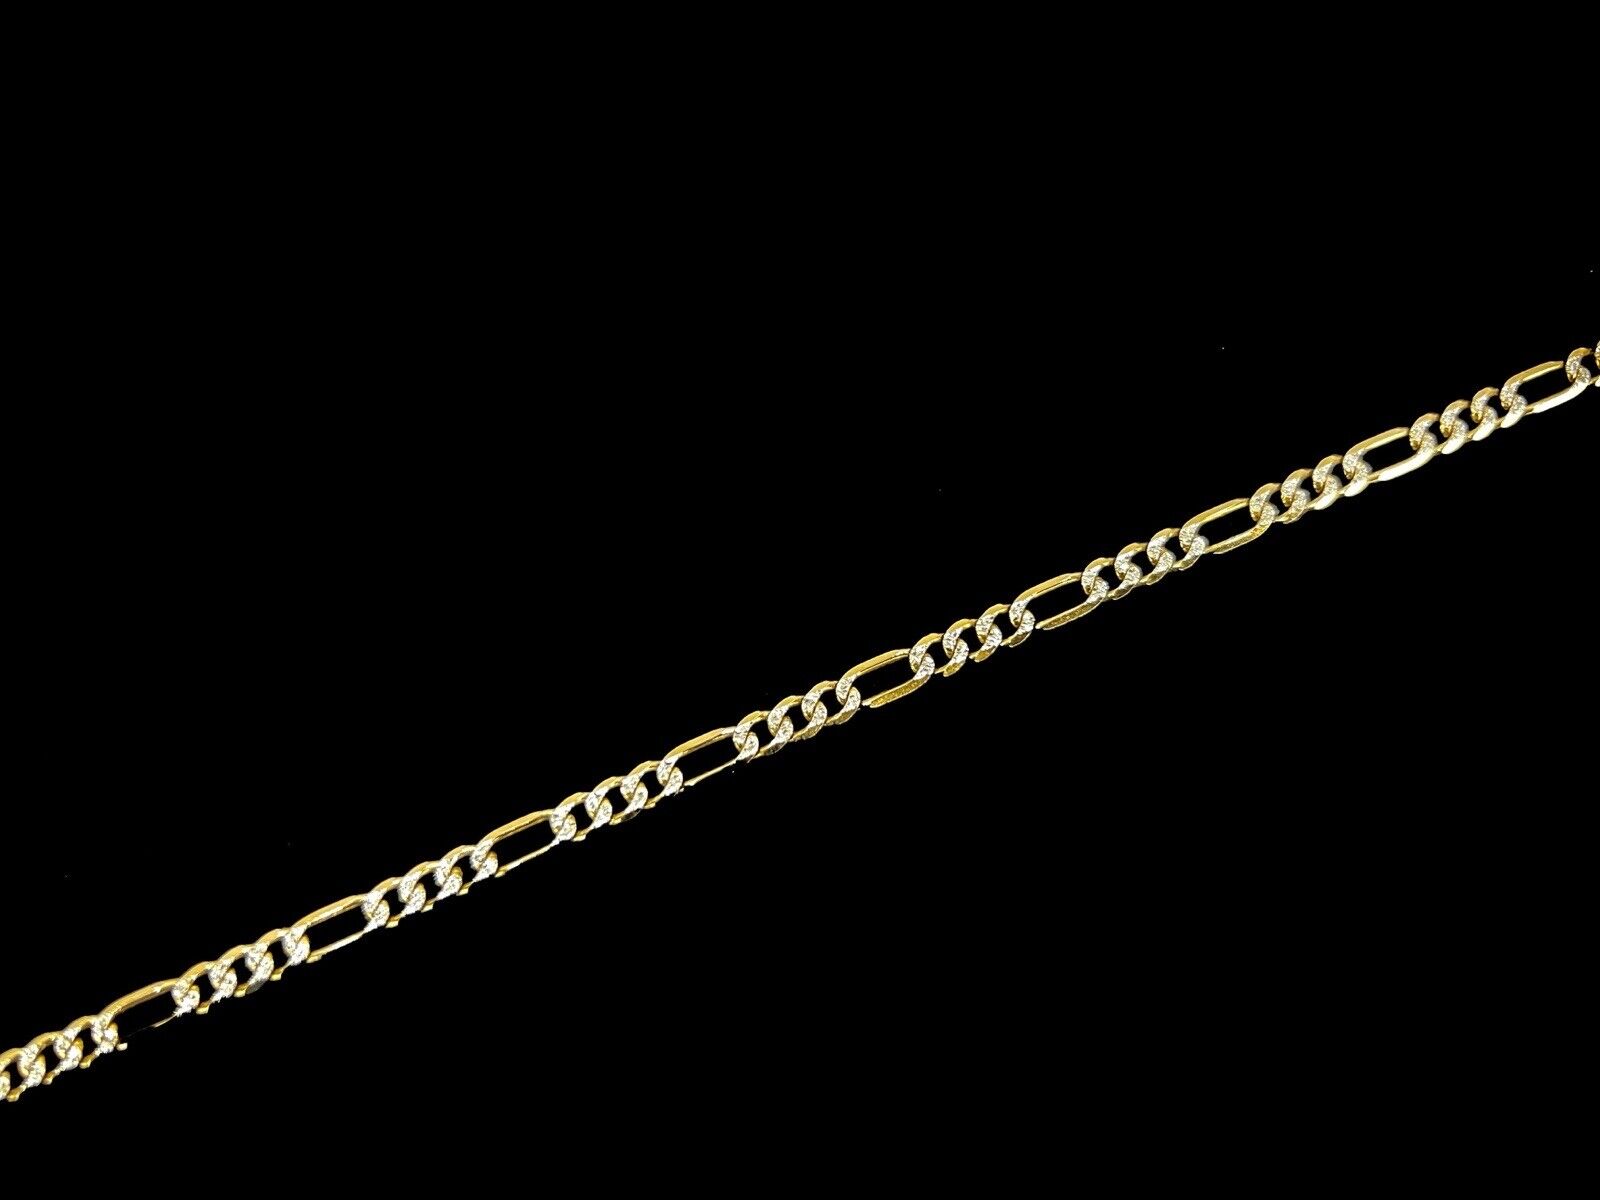 9ct Yellow Gold Figaro Link Necklace with White Gold Fancy - 22”, 15.3g